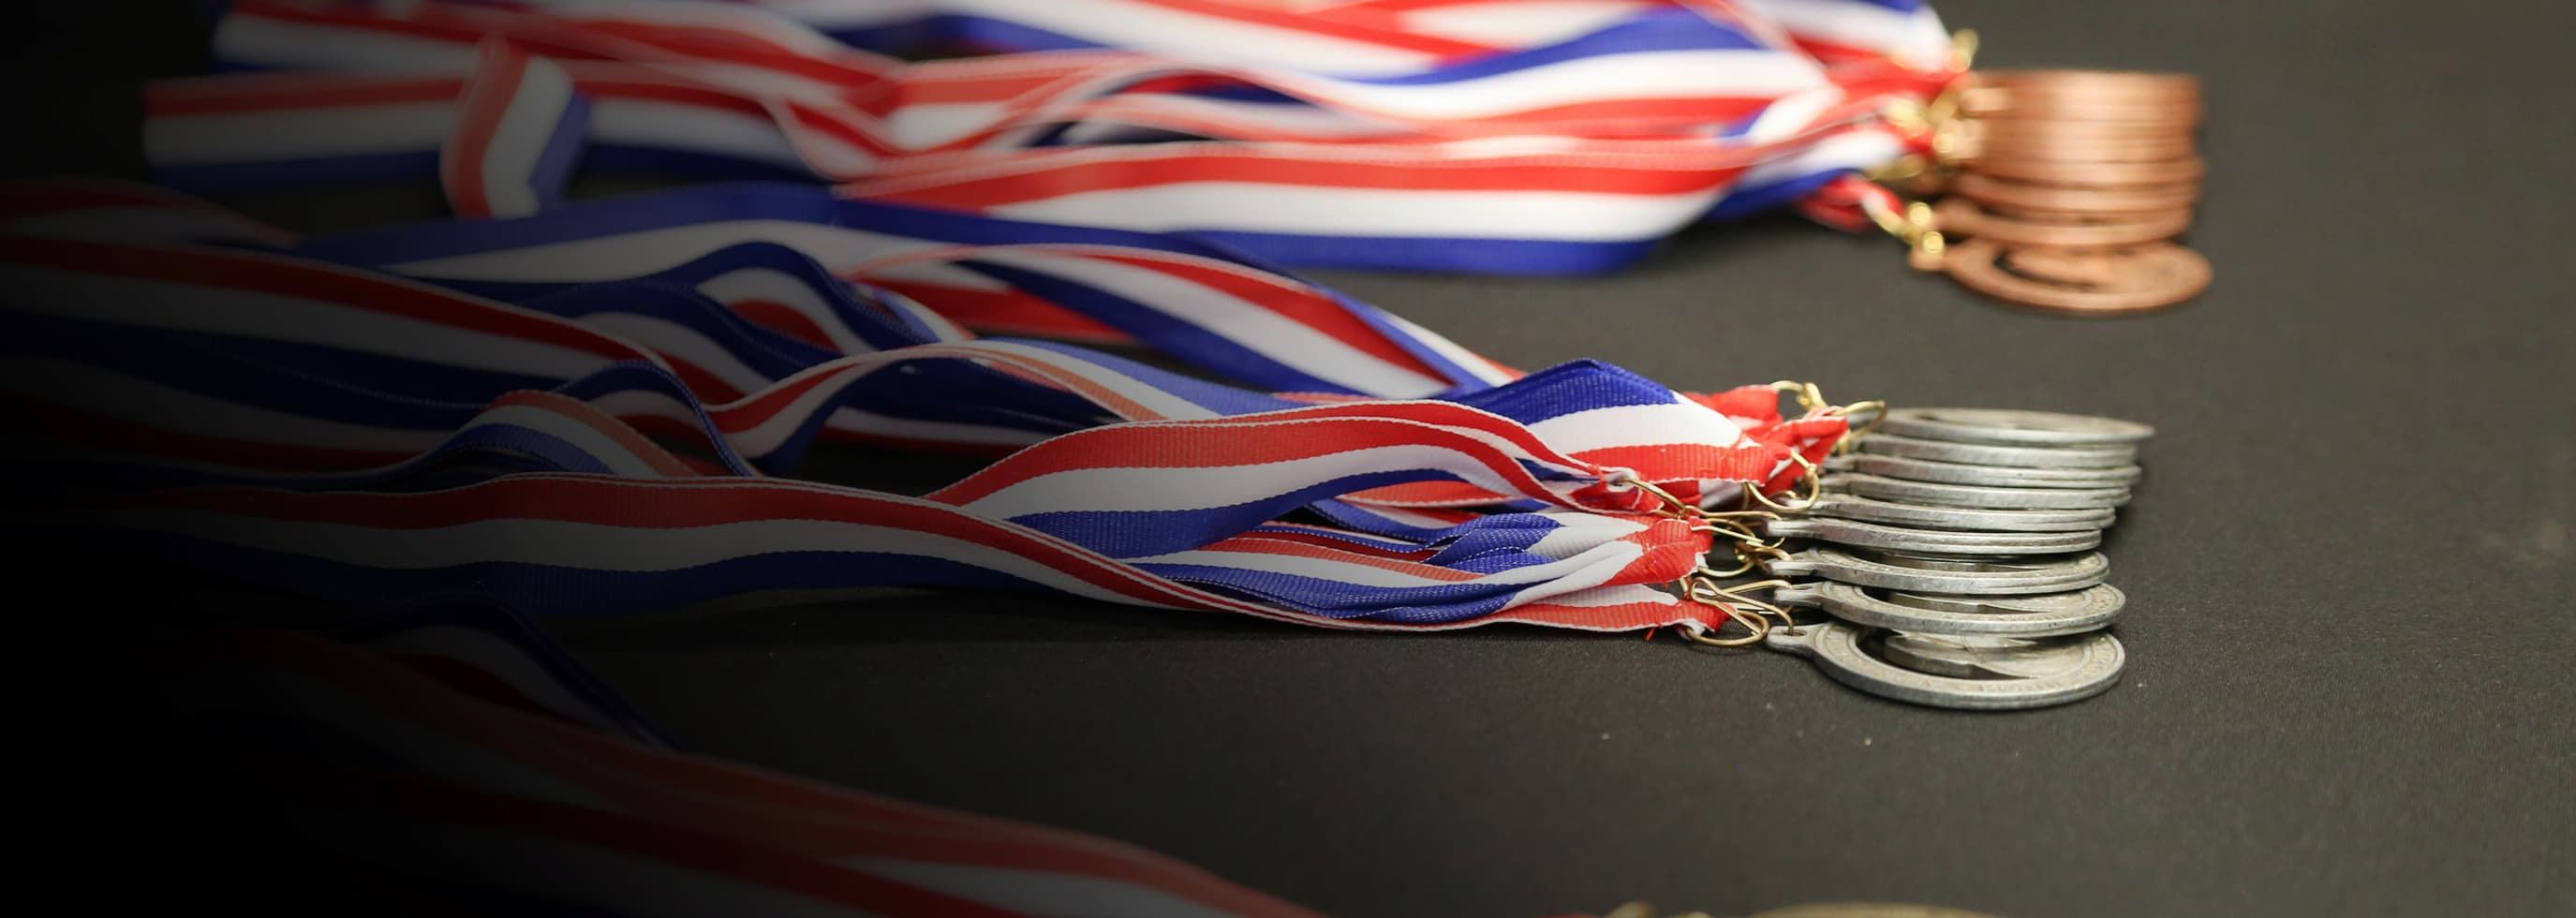 Lots of Skills Canada British Columbia Regional Skills Competition medals laying on the table.